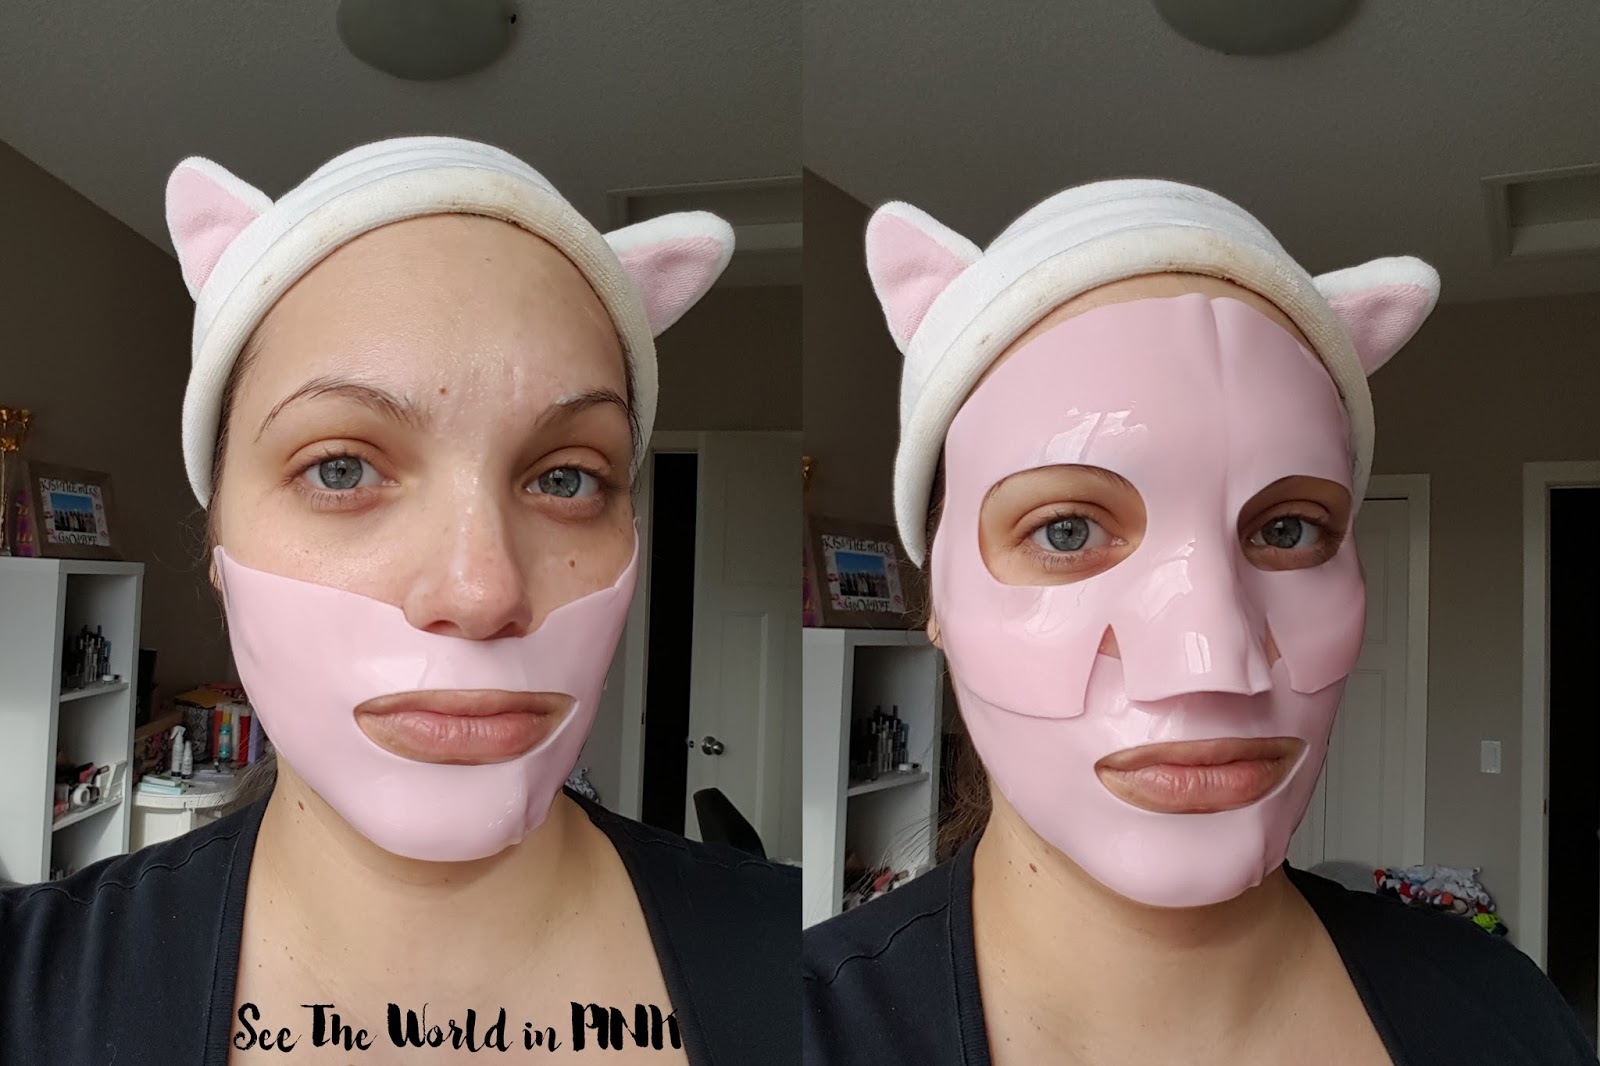 Dr. Jart+ Firm Lover Rubber Mask Review 